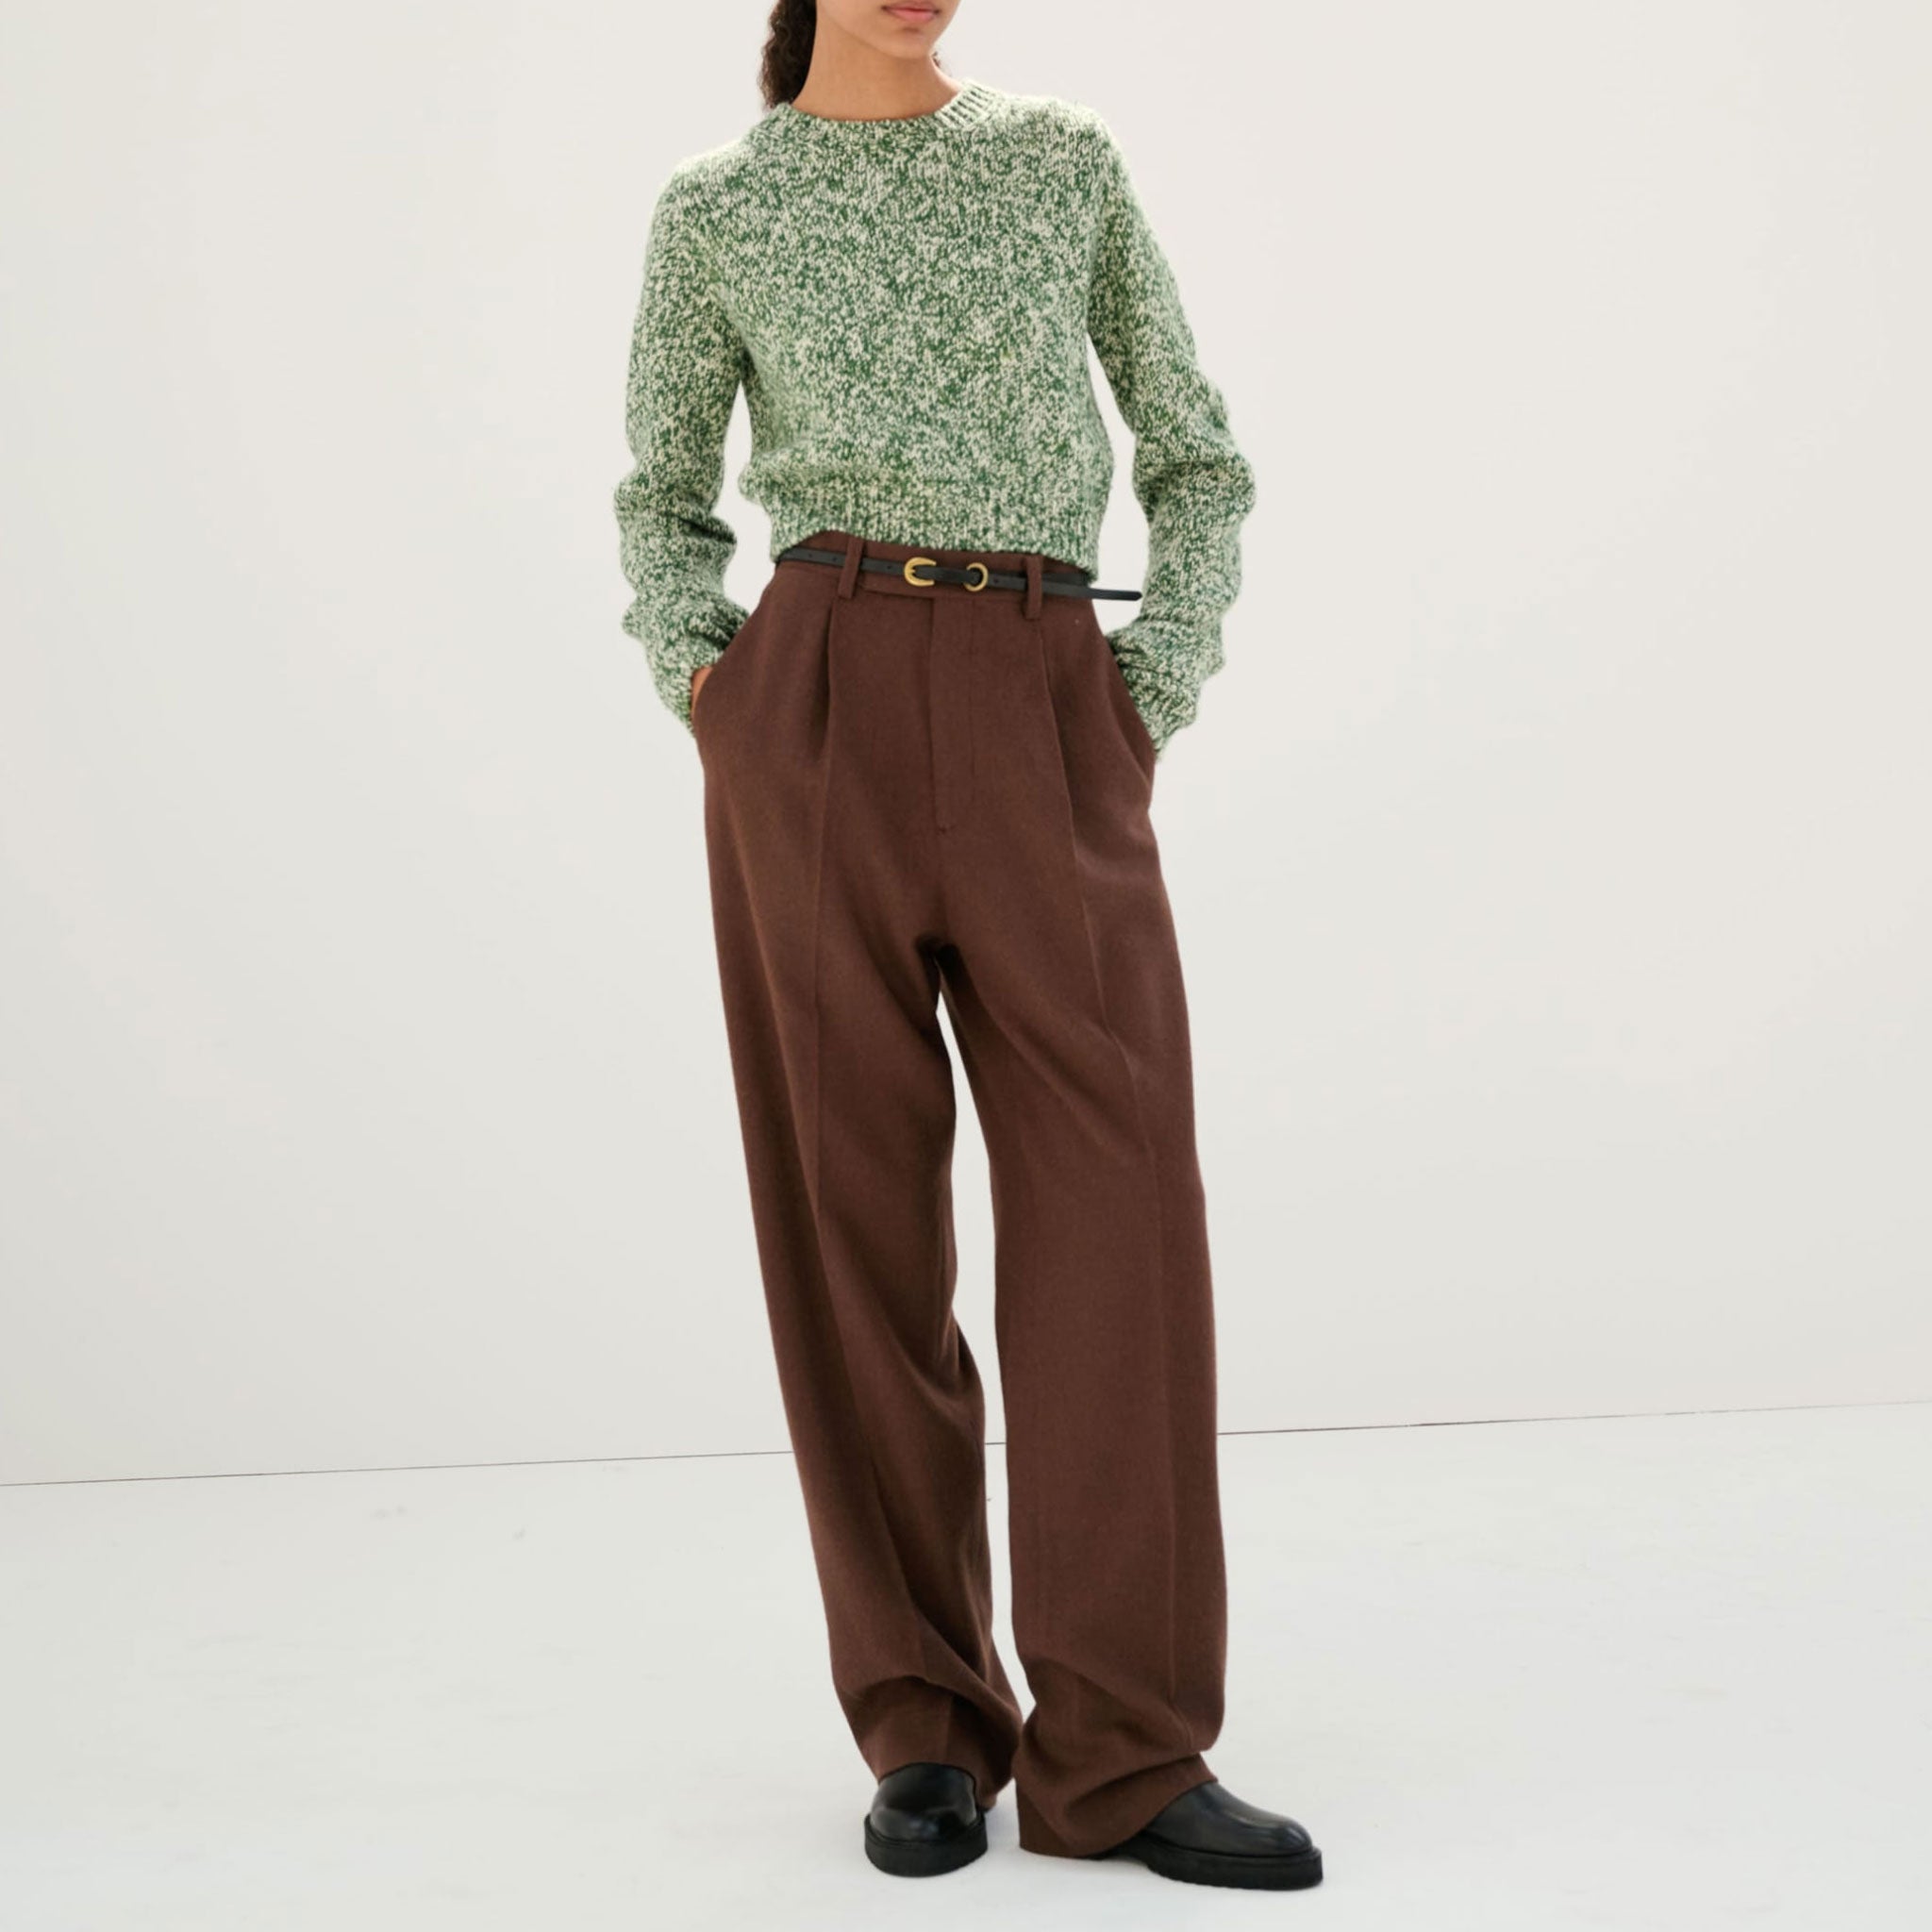 Camel Corduroy Trousers -Stancliffe Flat-Front in 8-Wale Cotton by